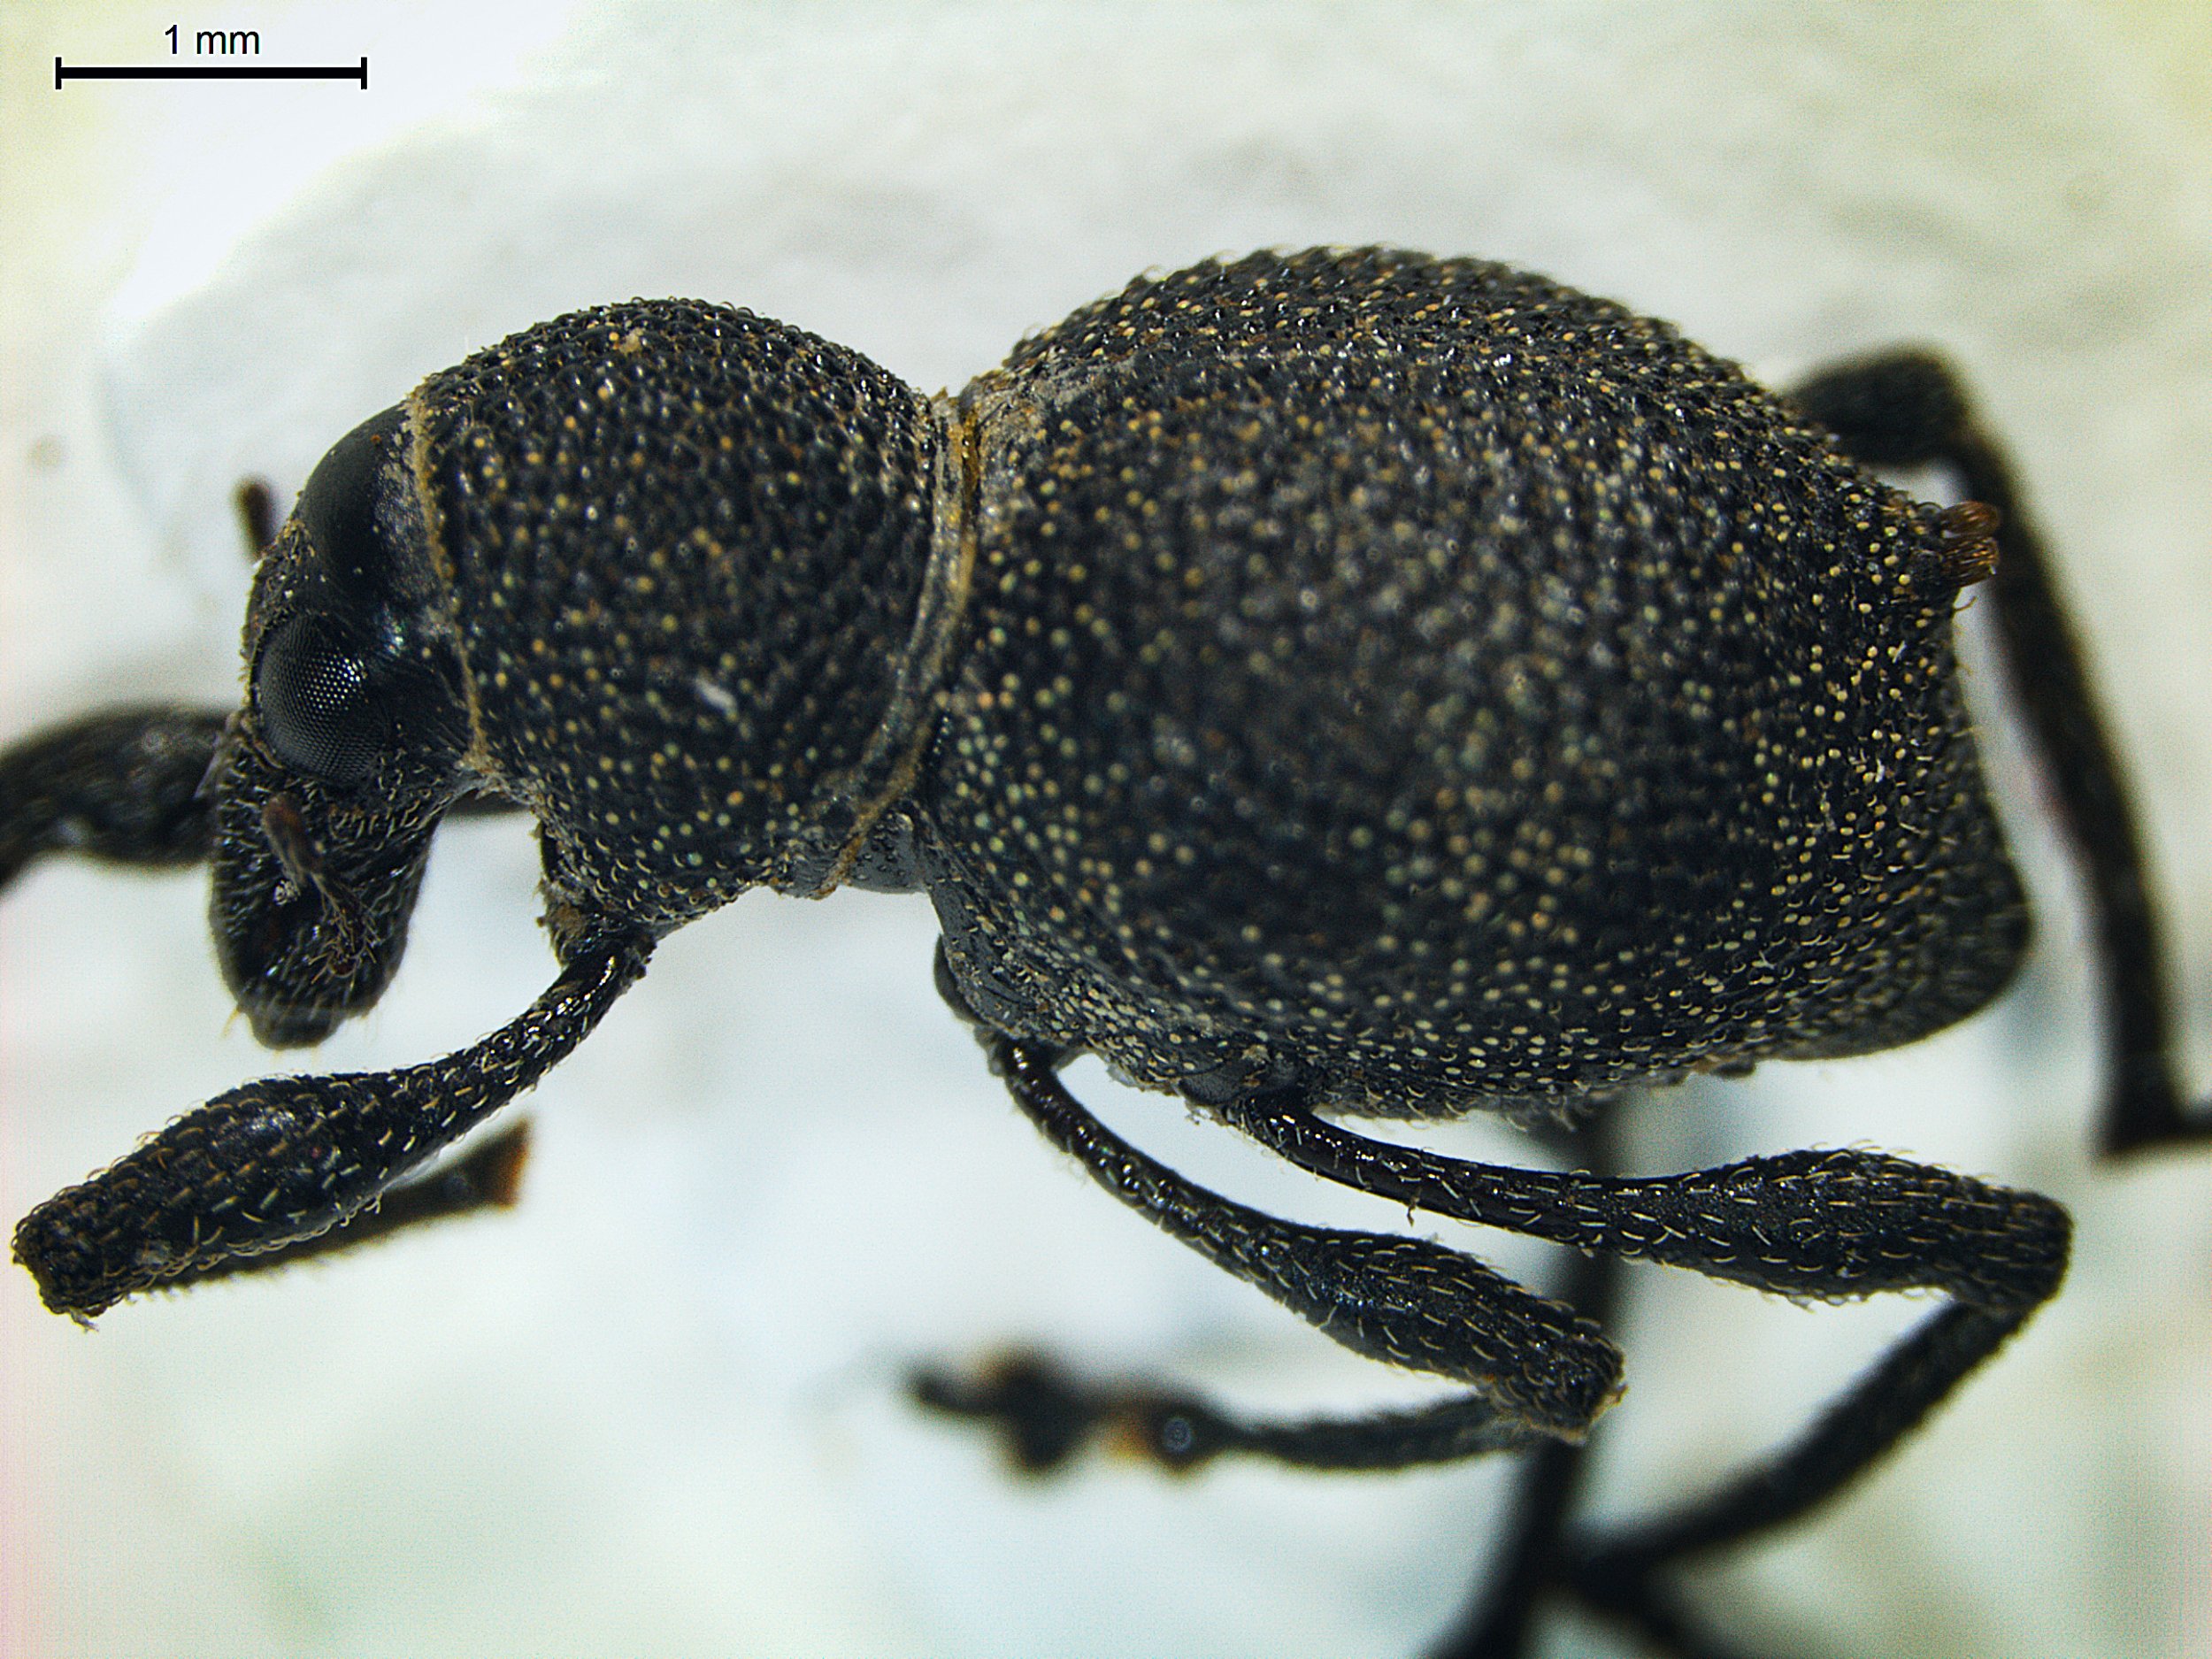 Metapocyrtus (Trachycyrtus) augustanae, a newly discovered species of weevil found in the Philippine rainforest, is named for the U of A's Augustana Campus.